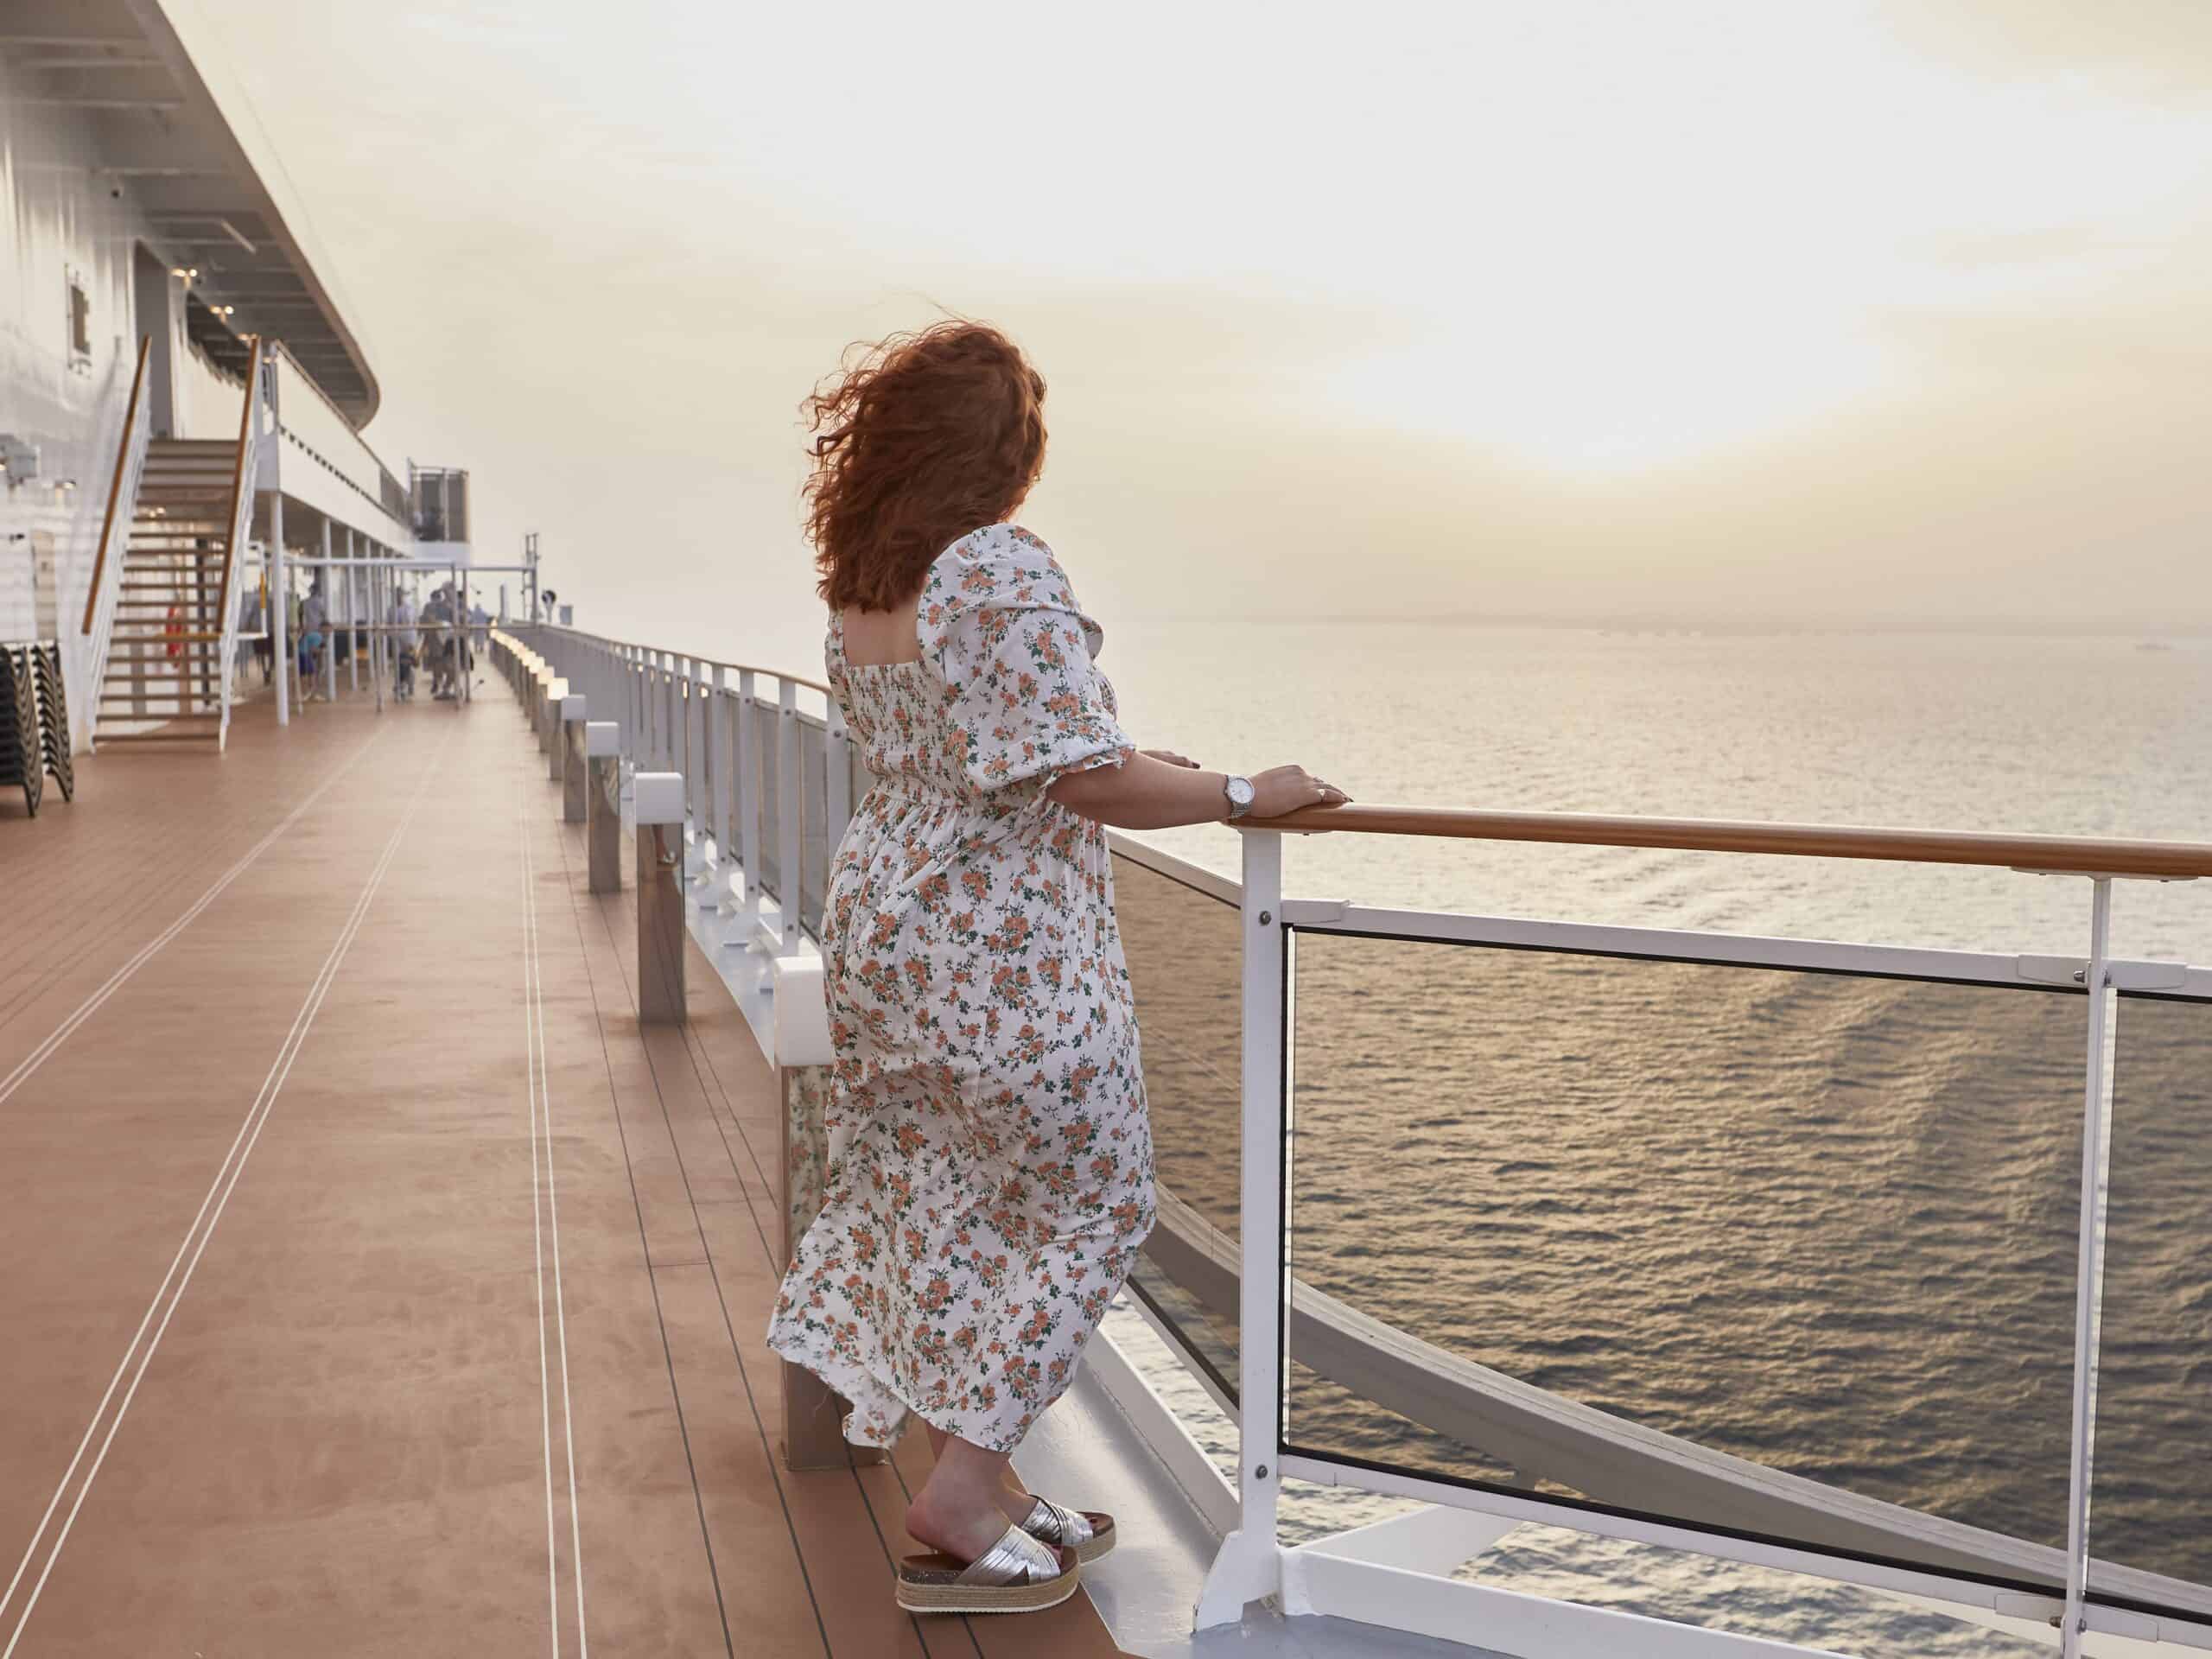 <p>More than 35 million travelers will cruise this year, and many of them are sailing with MSC Cruises around the world. MSC Cruises is relatively new to the American vacationer. It started offering U.S. cruises in 2013 but has become more popular in North America in the past couple of years. </p> <p>So, this Spring Break, my daughter and I took a 3-day cruise from Cape Canaveral Florida to the Caribbean to see for ourselves why so many Americans are hitting the sea for vacation, and increasingly with MSC Cruises.</p>